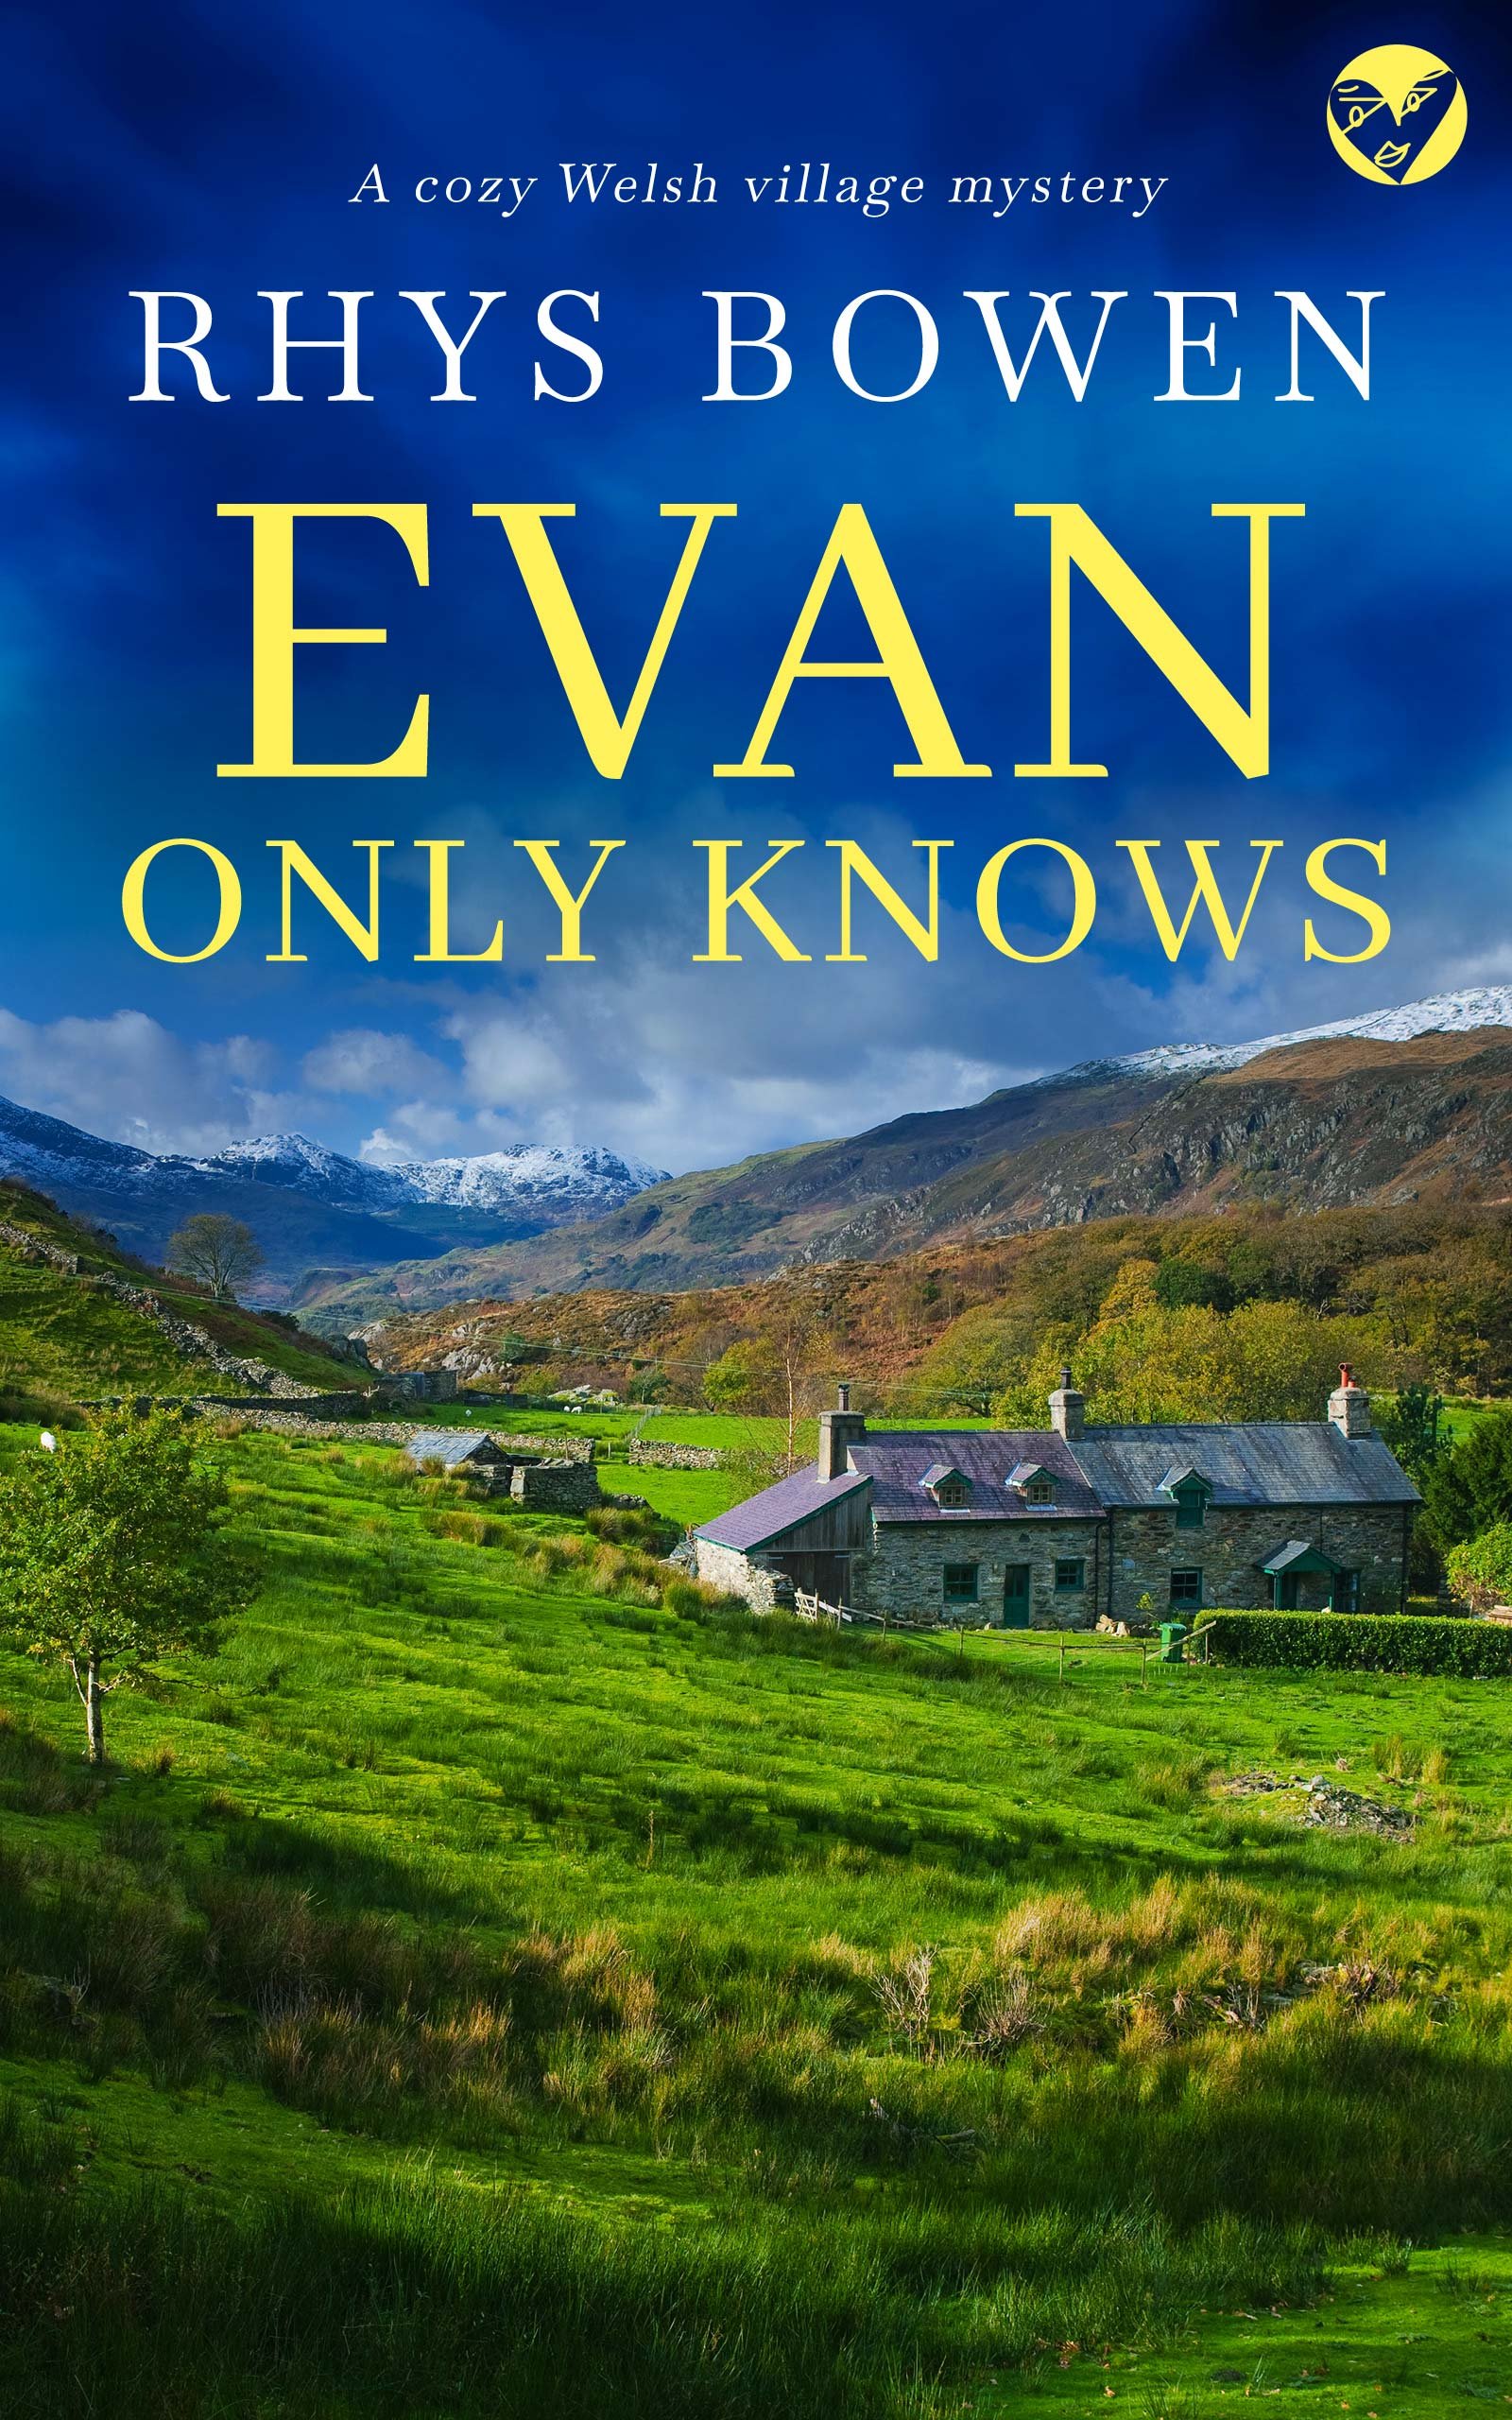 EVAN ONLY KNOWS Cover publish 629KB (1).jpg